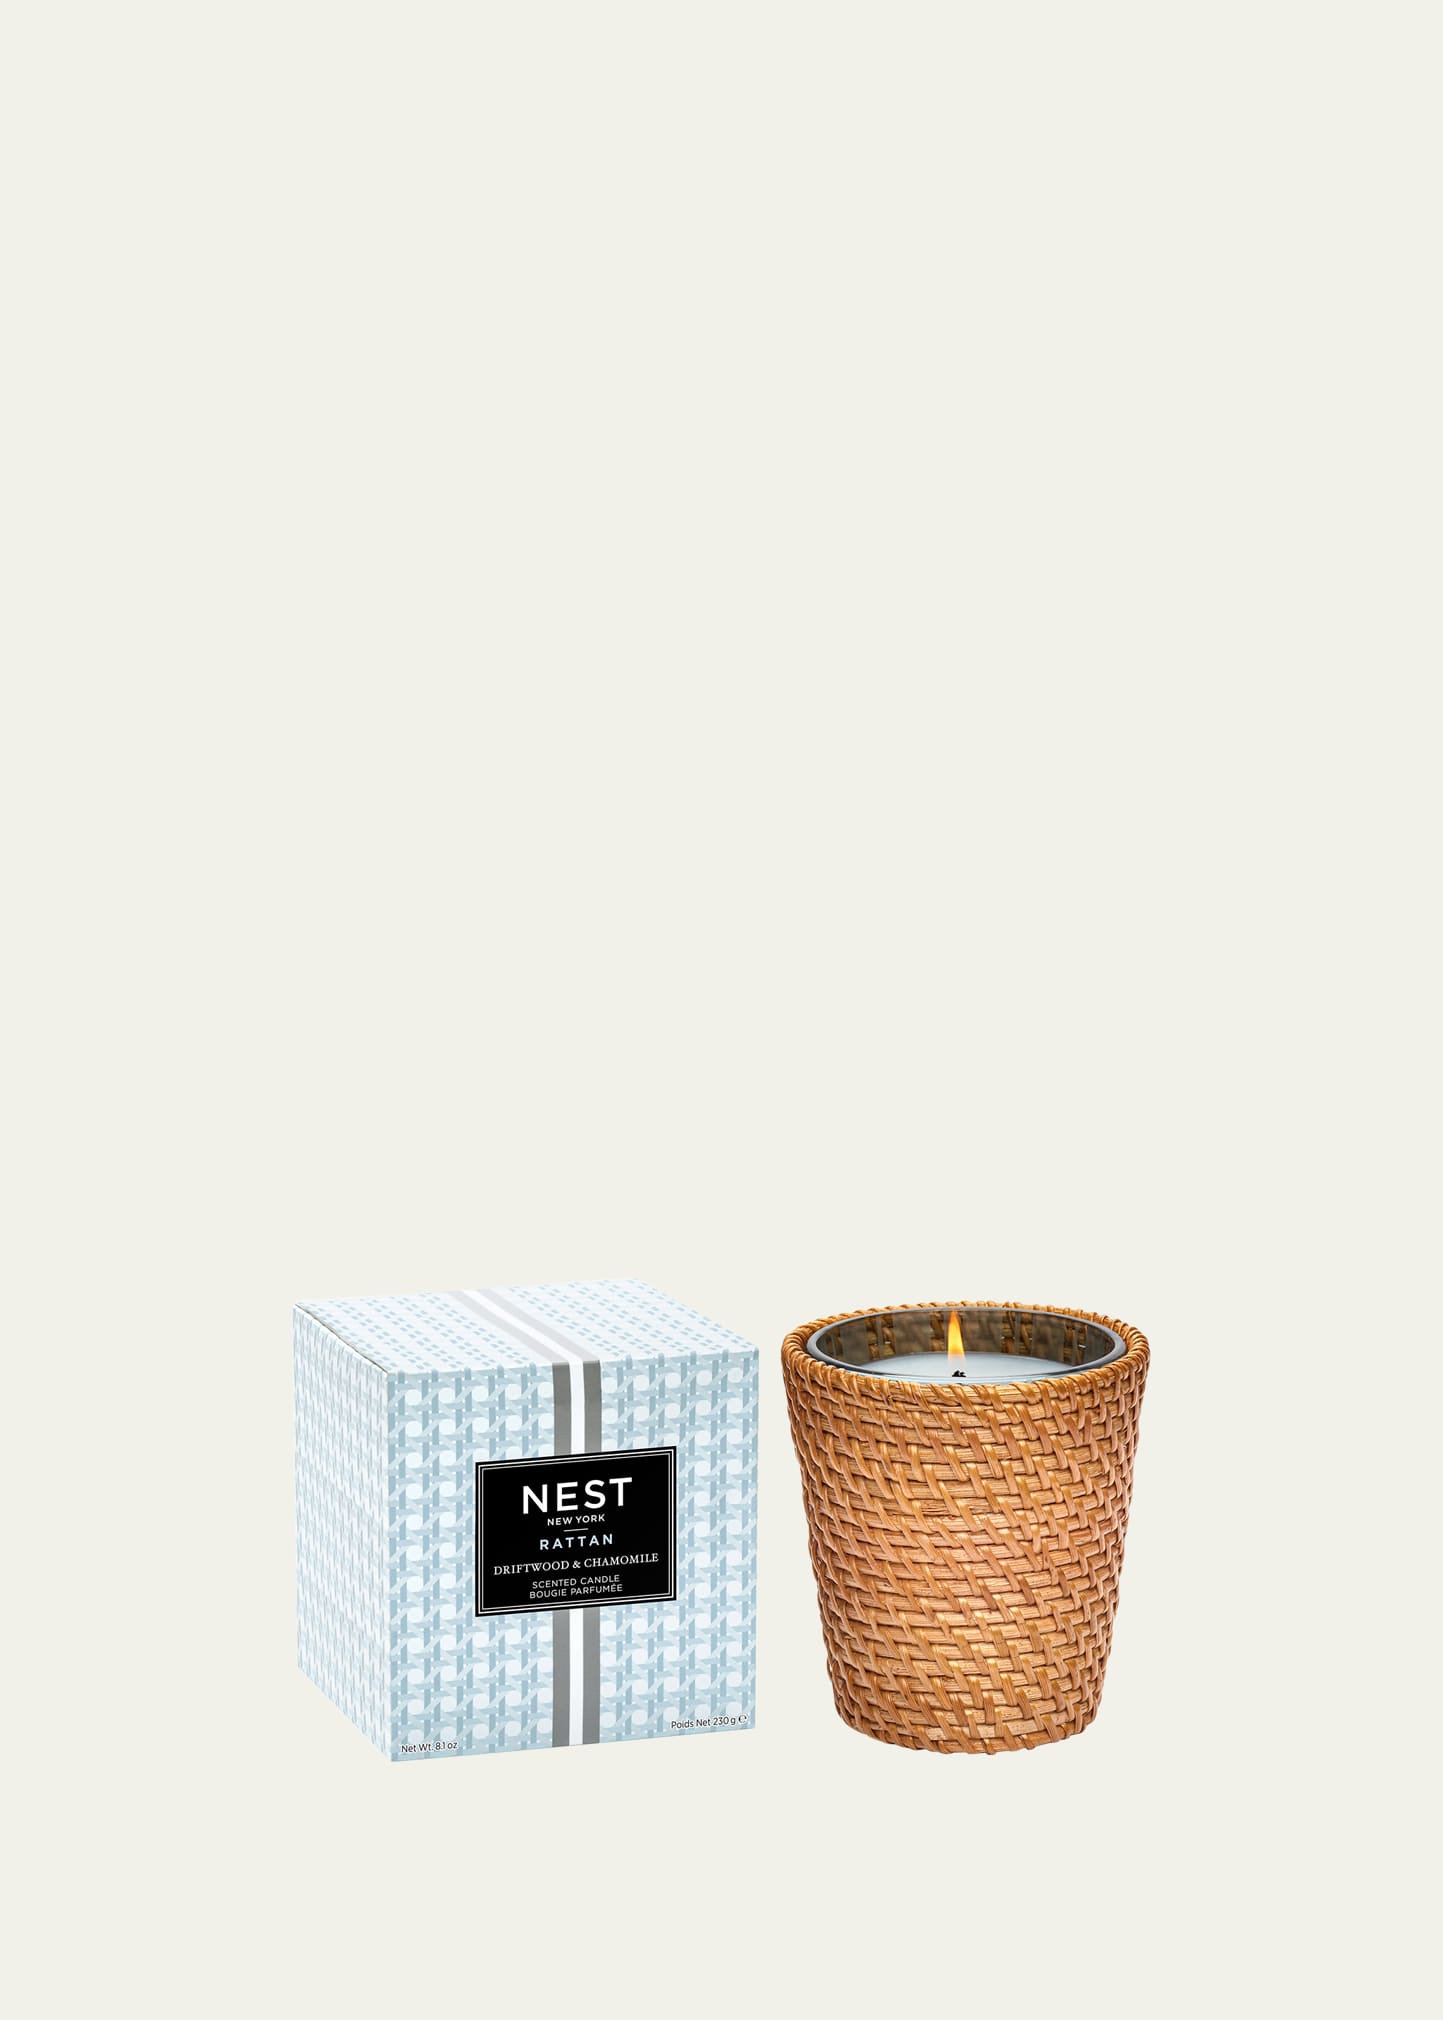 NEST NEW YORK RATTAN DRIFTWOOD AND CHAMOMILE CLASSIC CANDLE, 8.1 OZ.